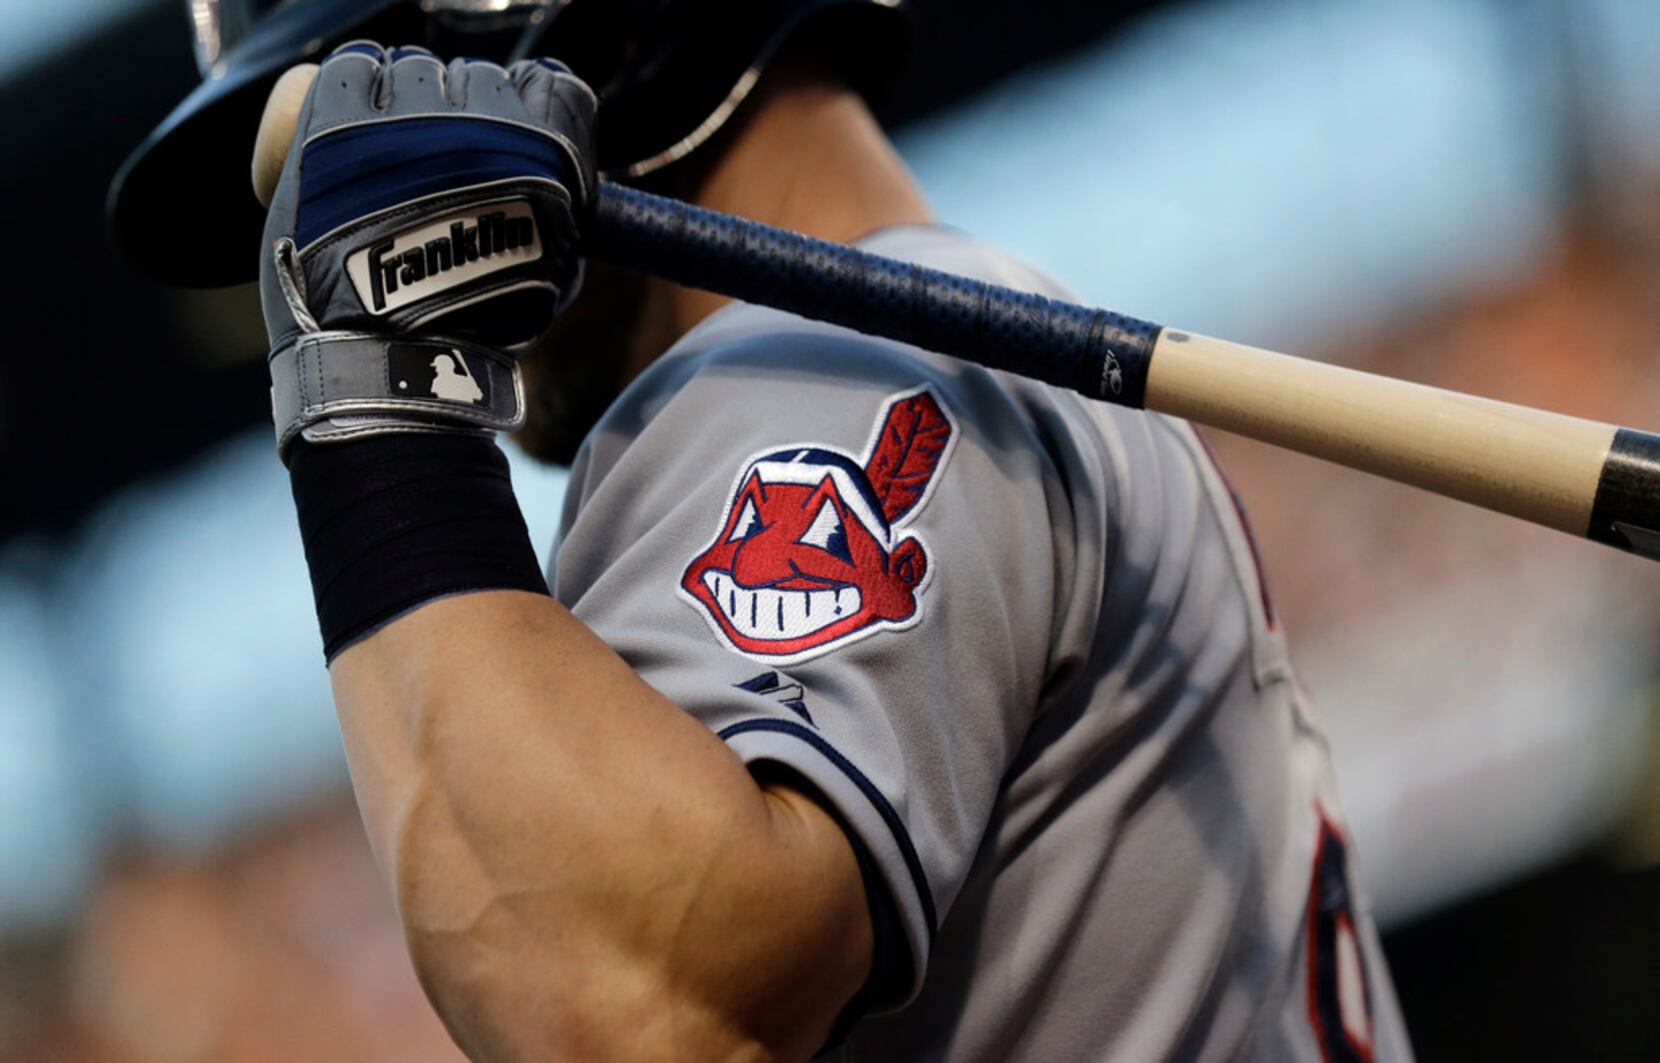 Cleveland Indians removing Chief Wahoo logo from uniforms starting in 2019